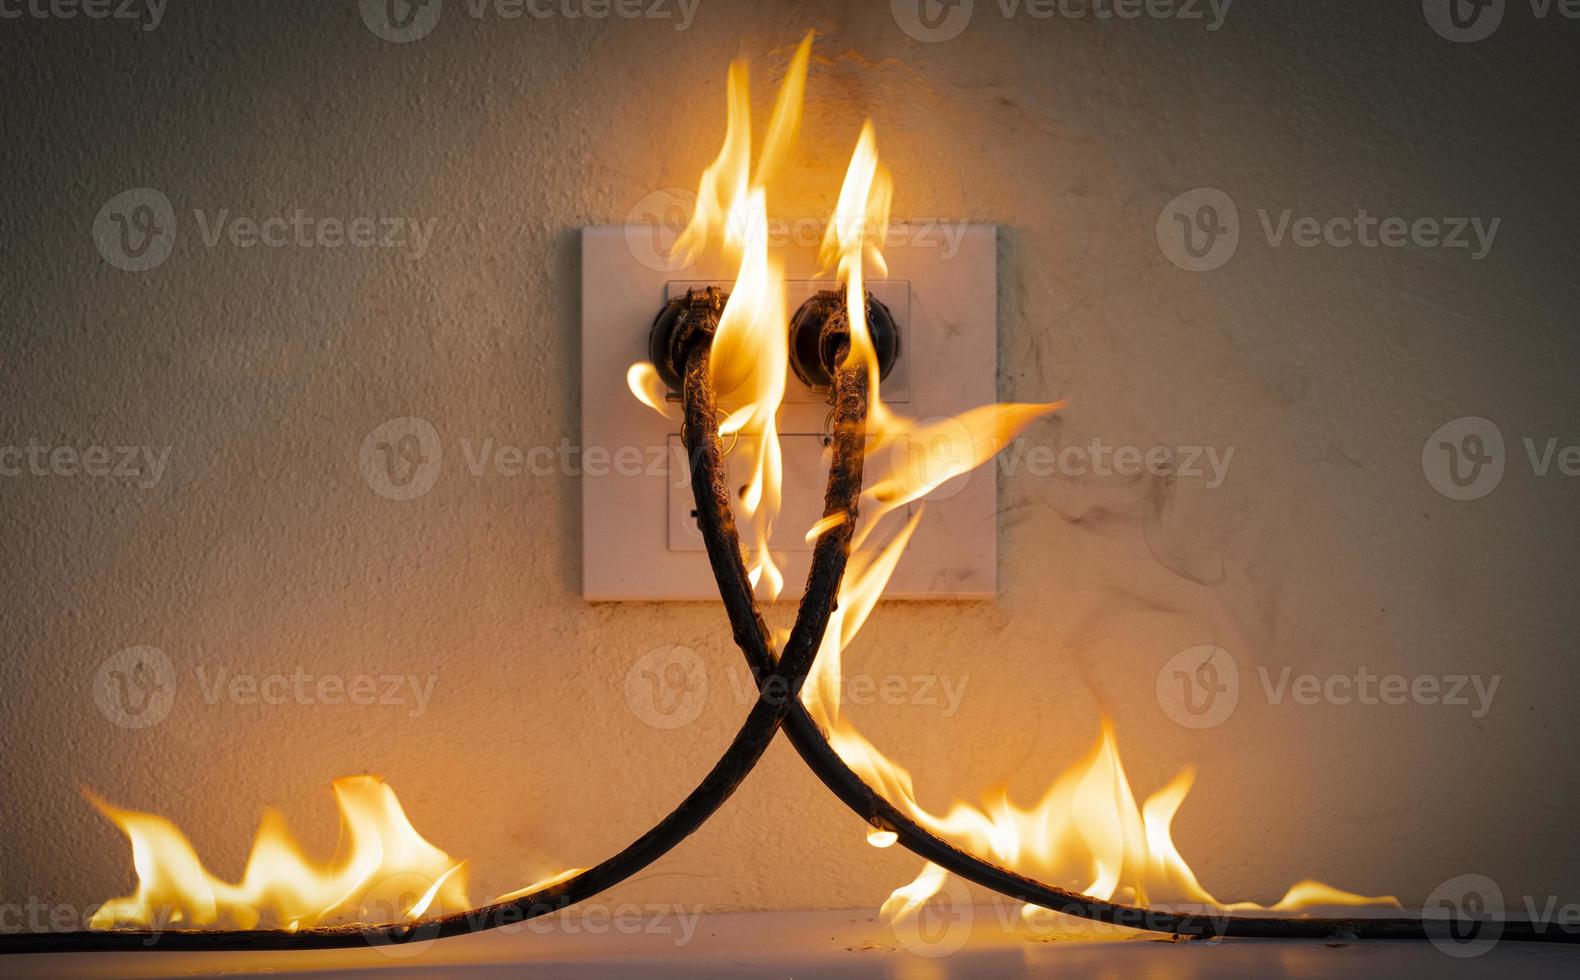 On fire electric wire plug Receptacle photo